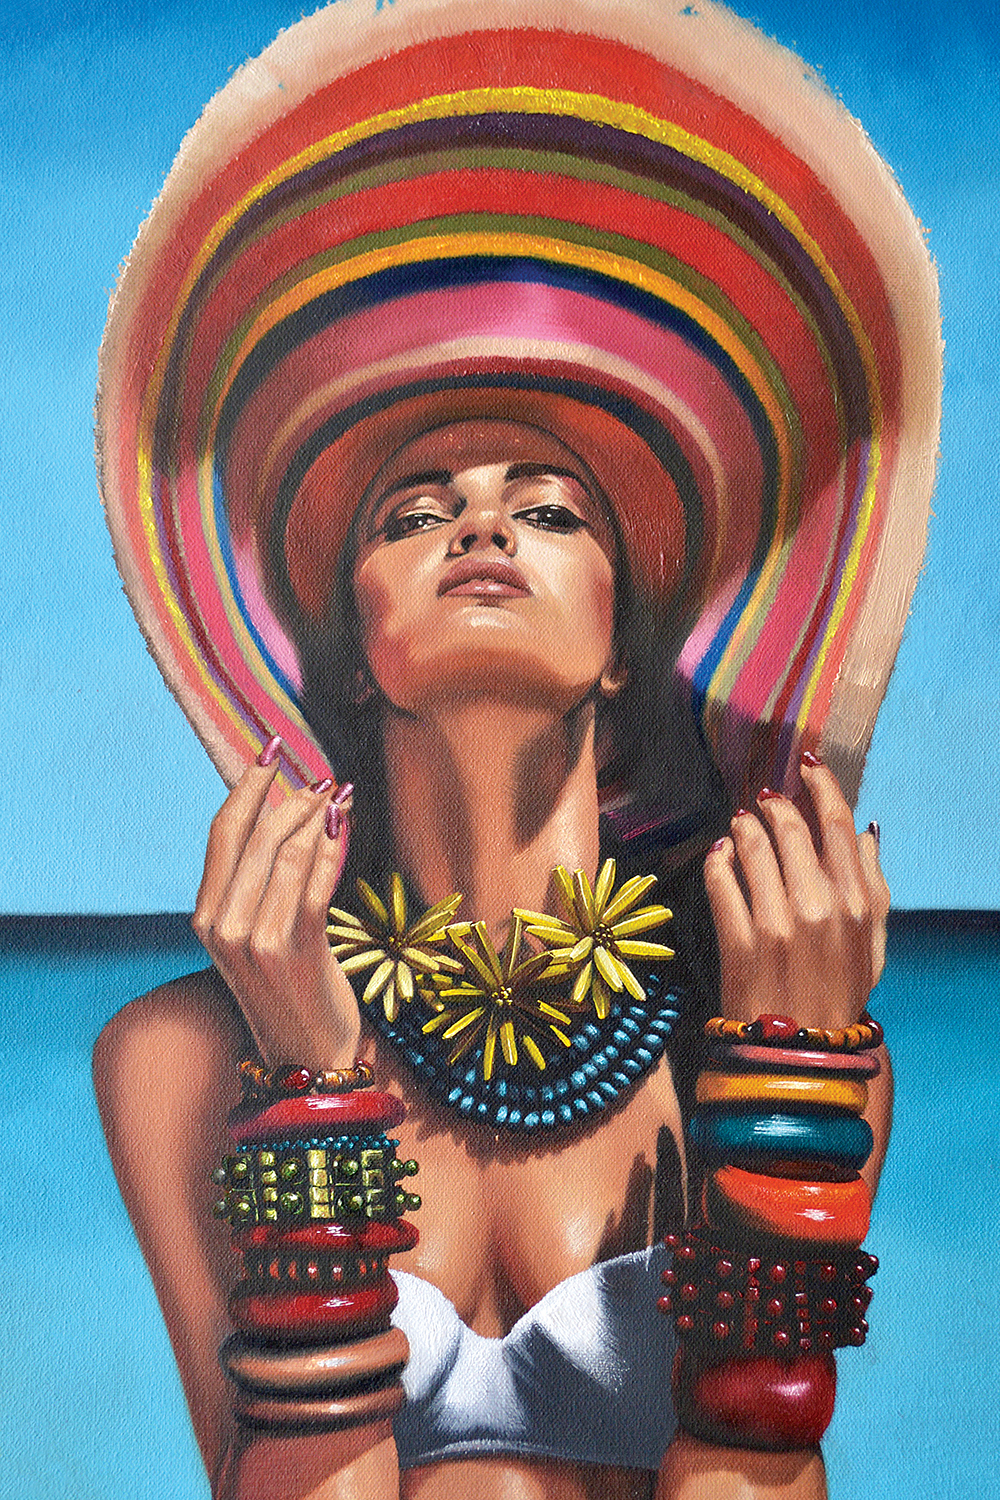 woman wearing large colorful sun hat, oversized necklaces, many bracelets, and white bathing suit top in front of blue